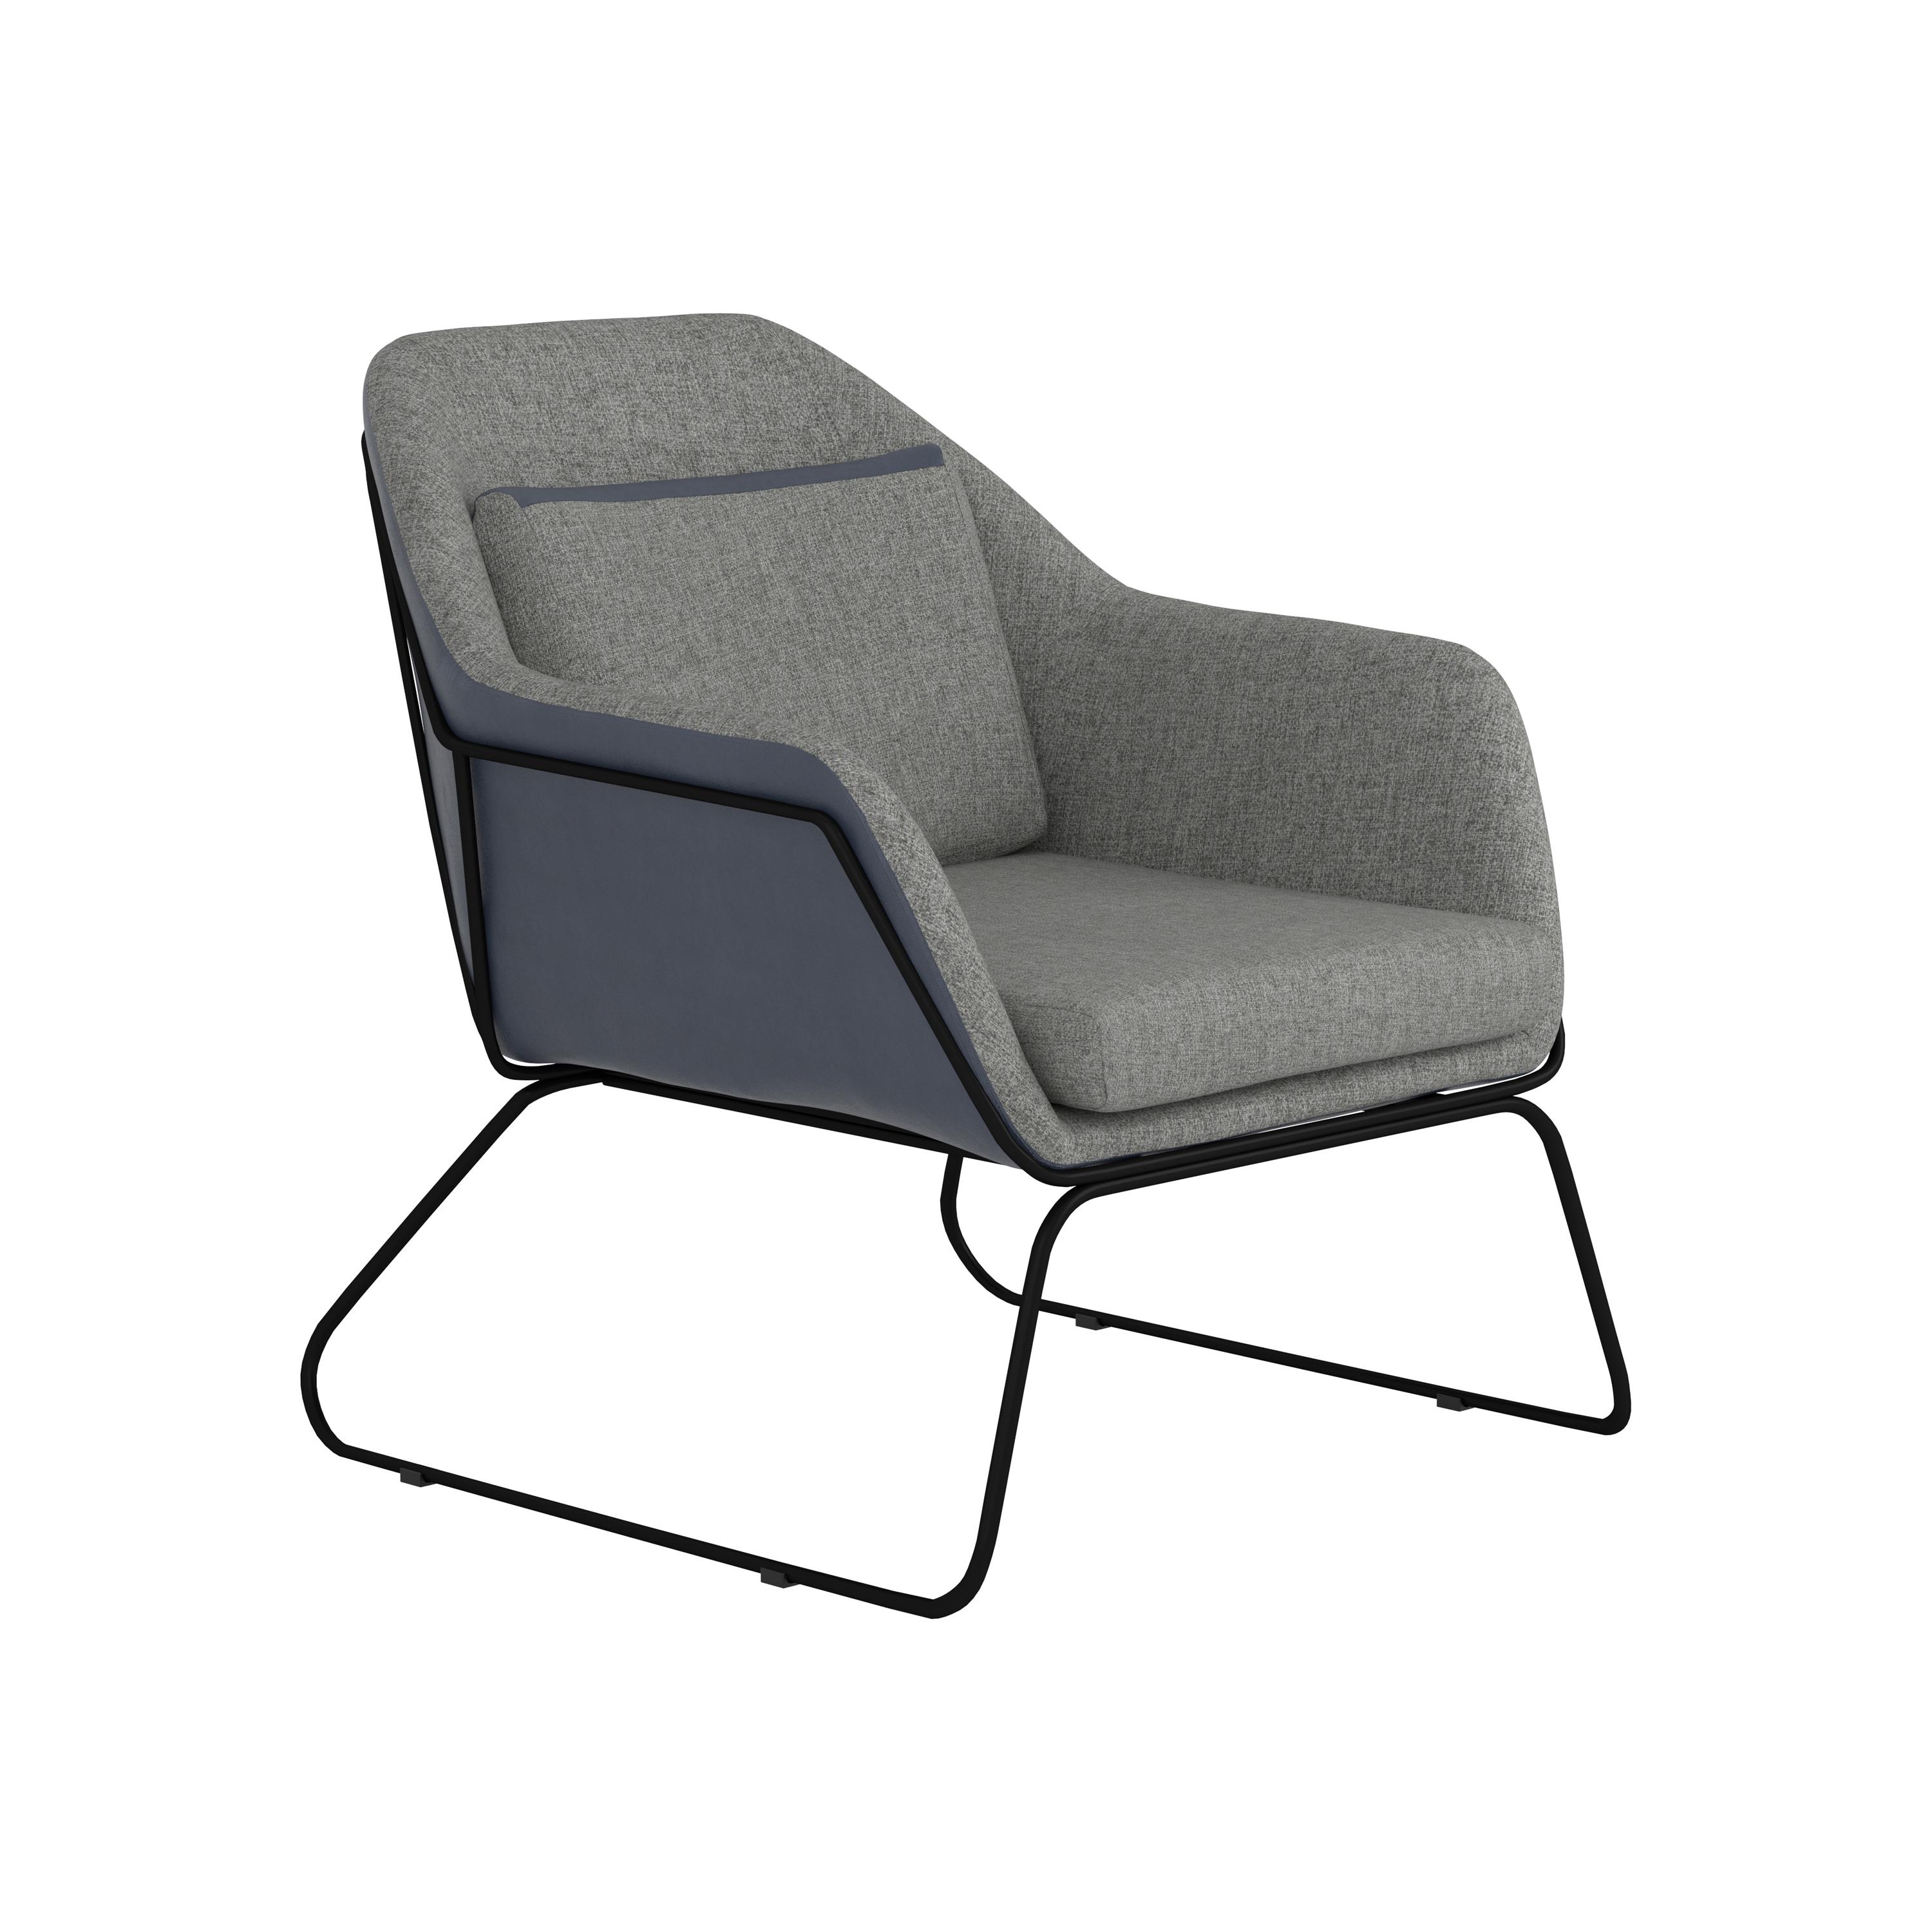 Modern Accent Chair 903980 903980 in Gray 